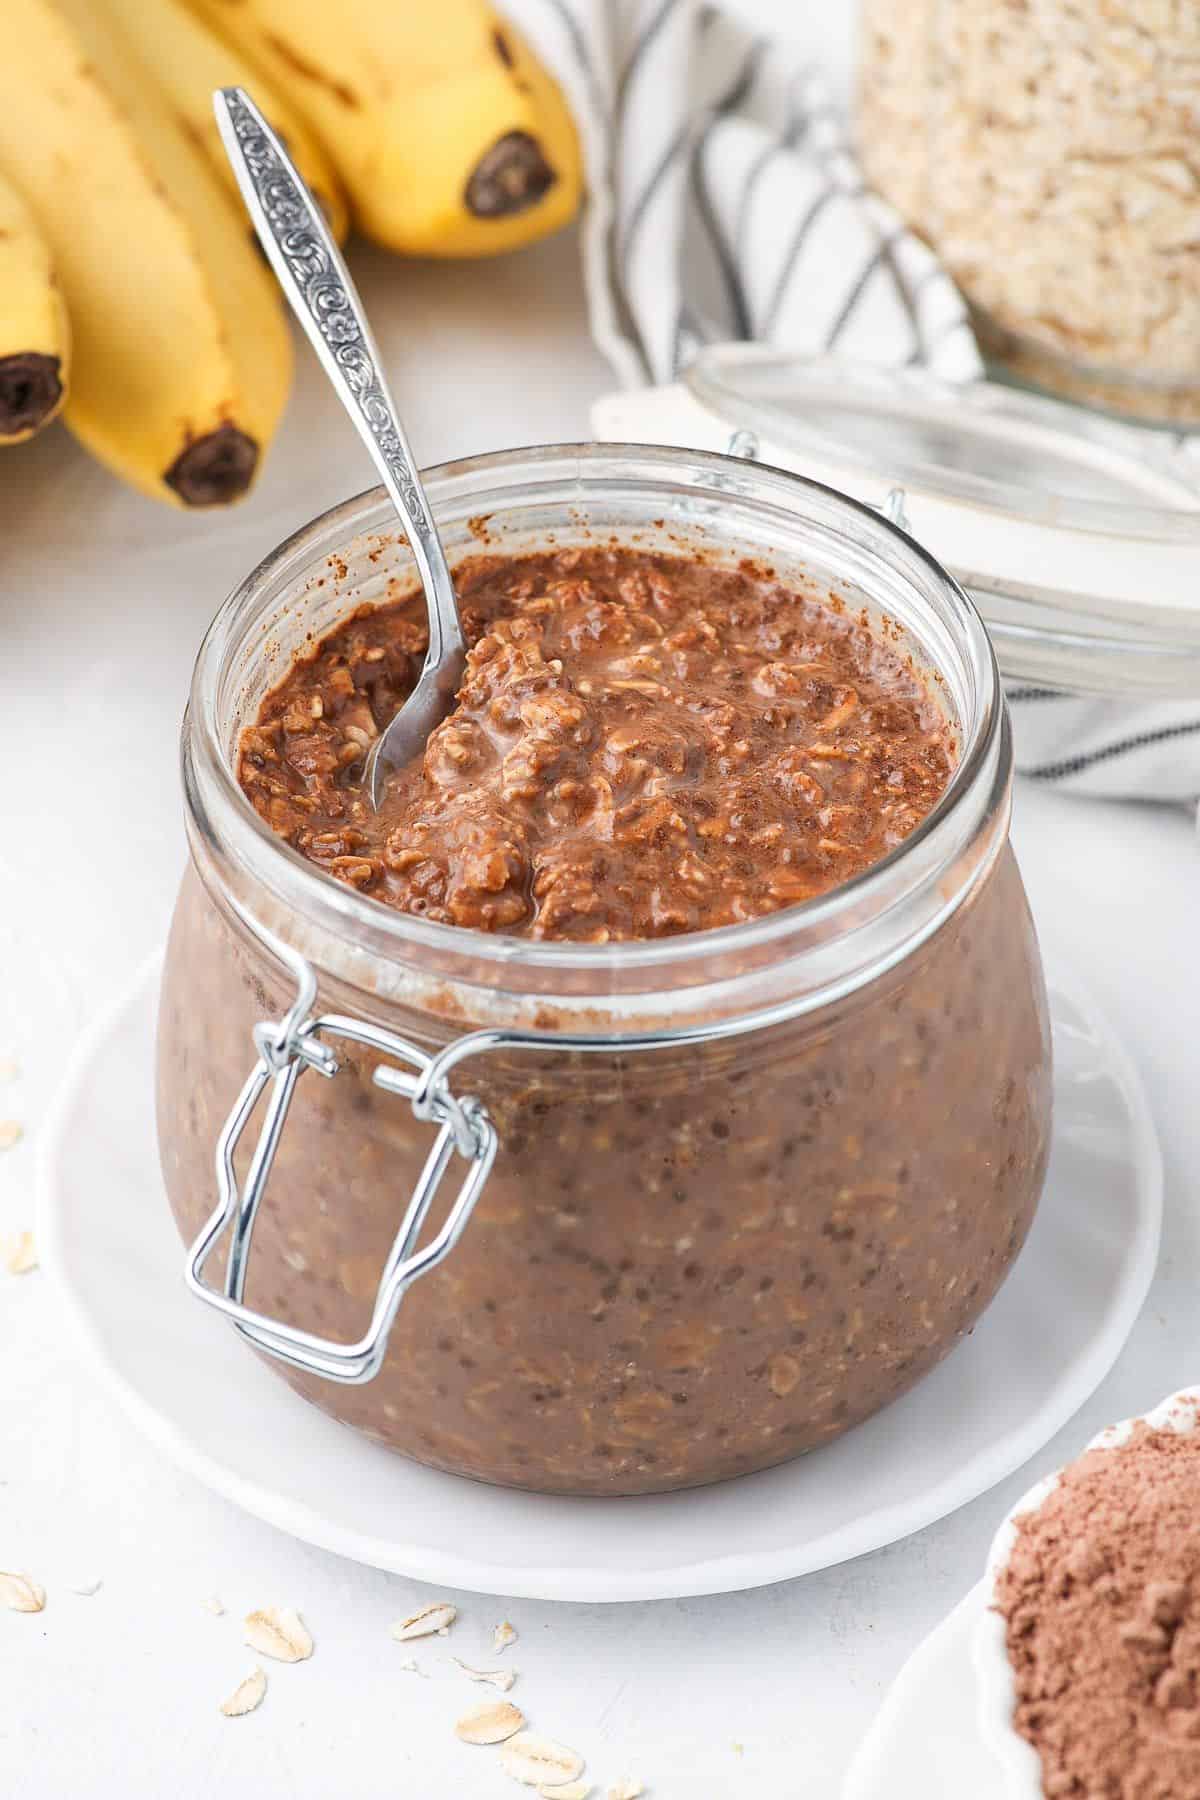 Jar of oats without any toppings, with a spoon in the jar.